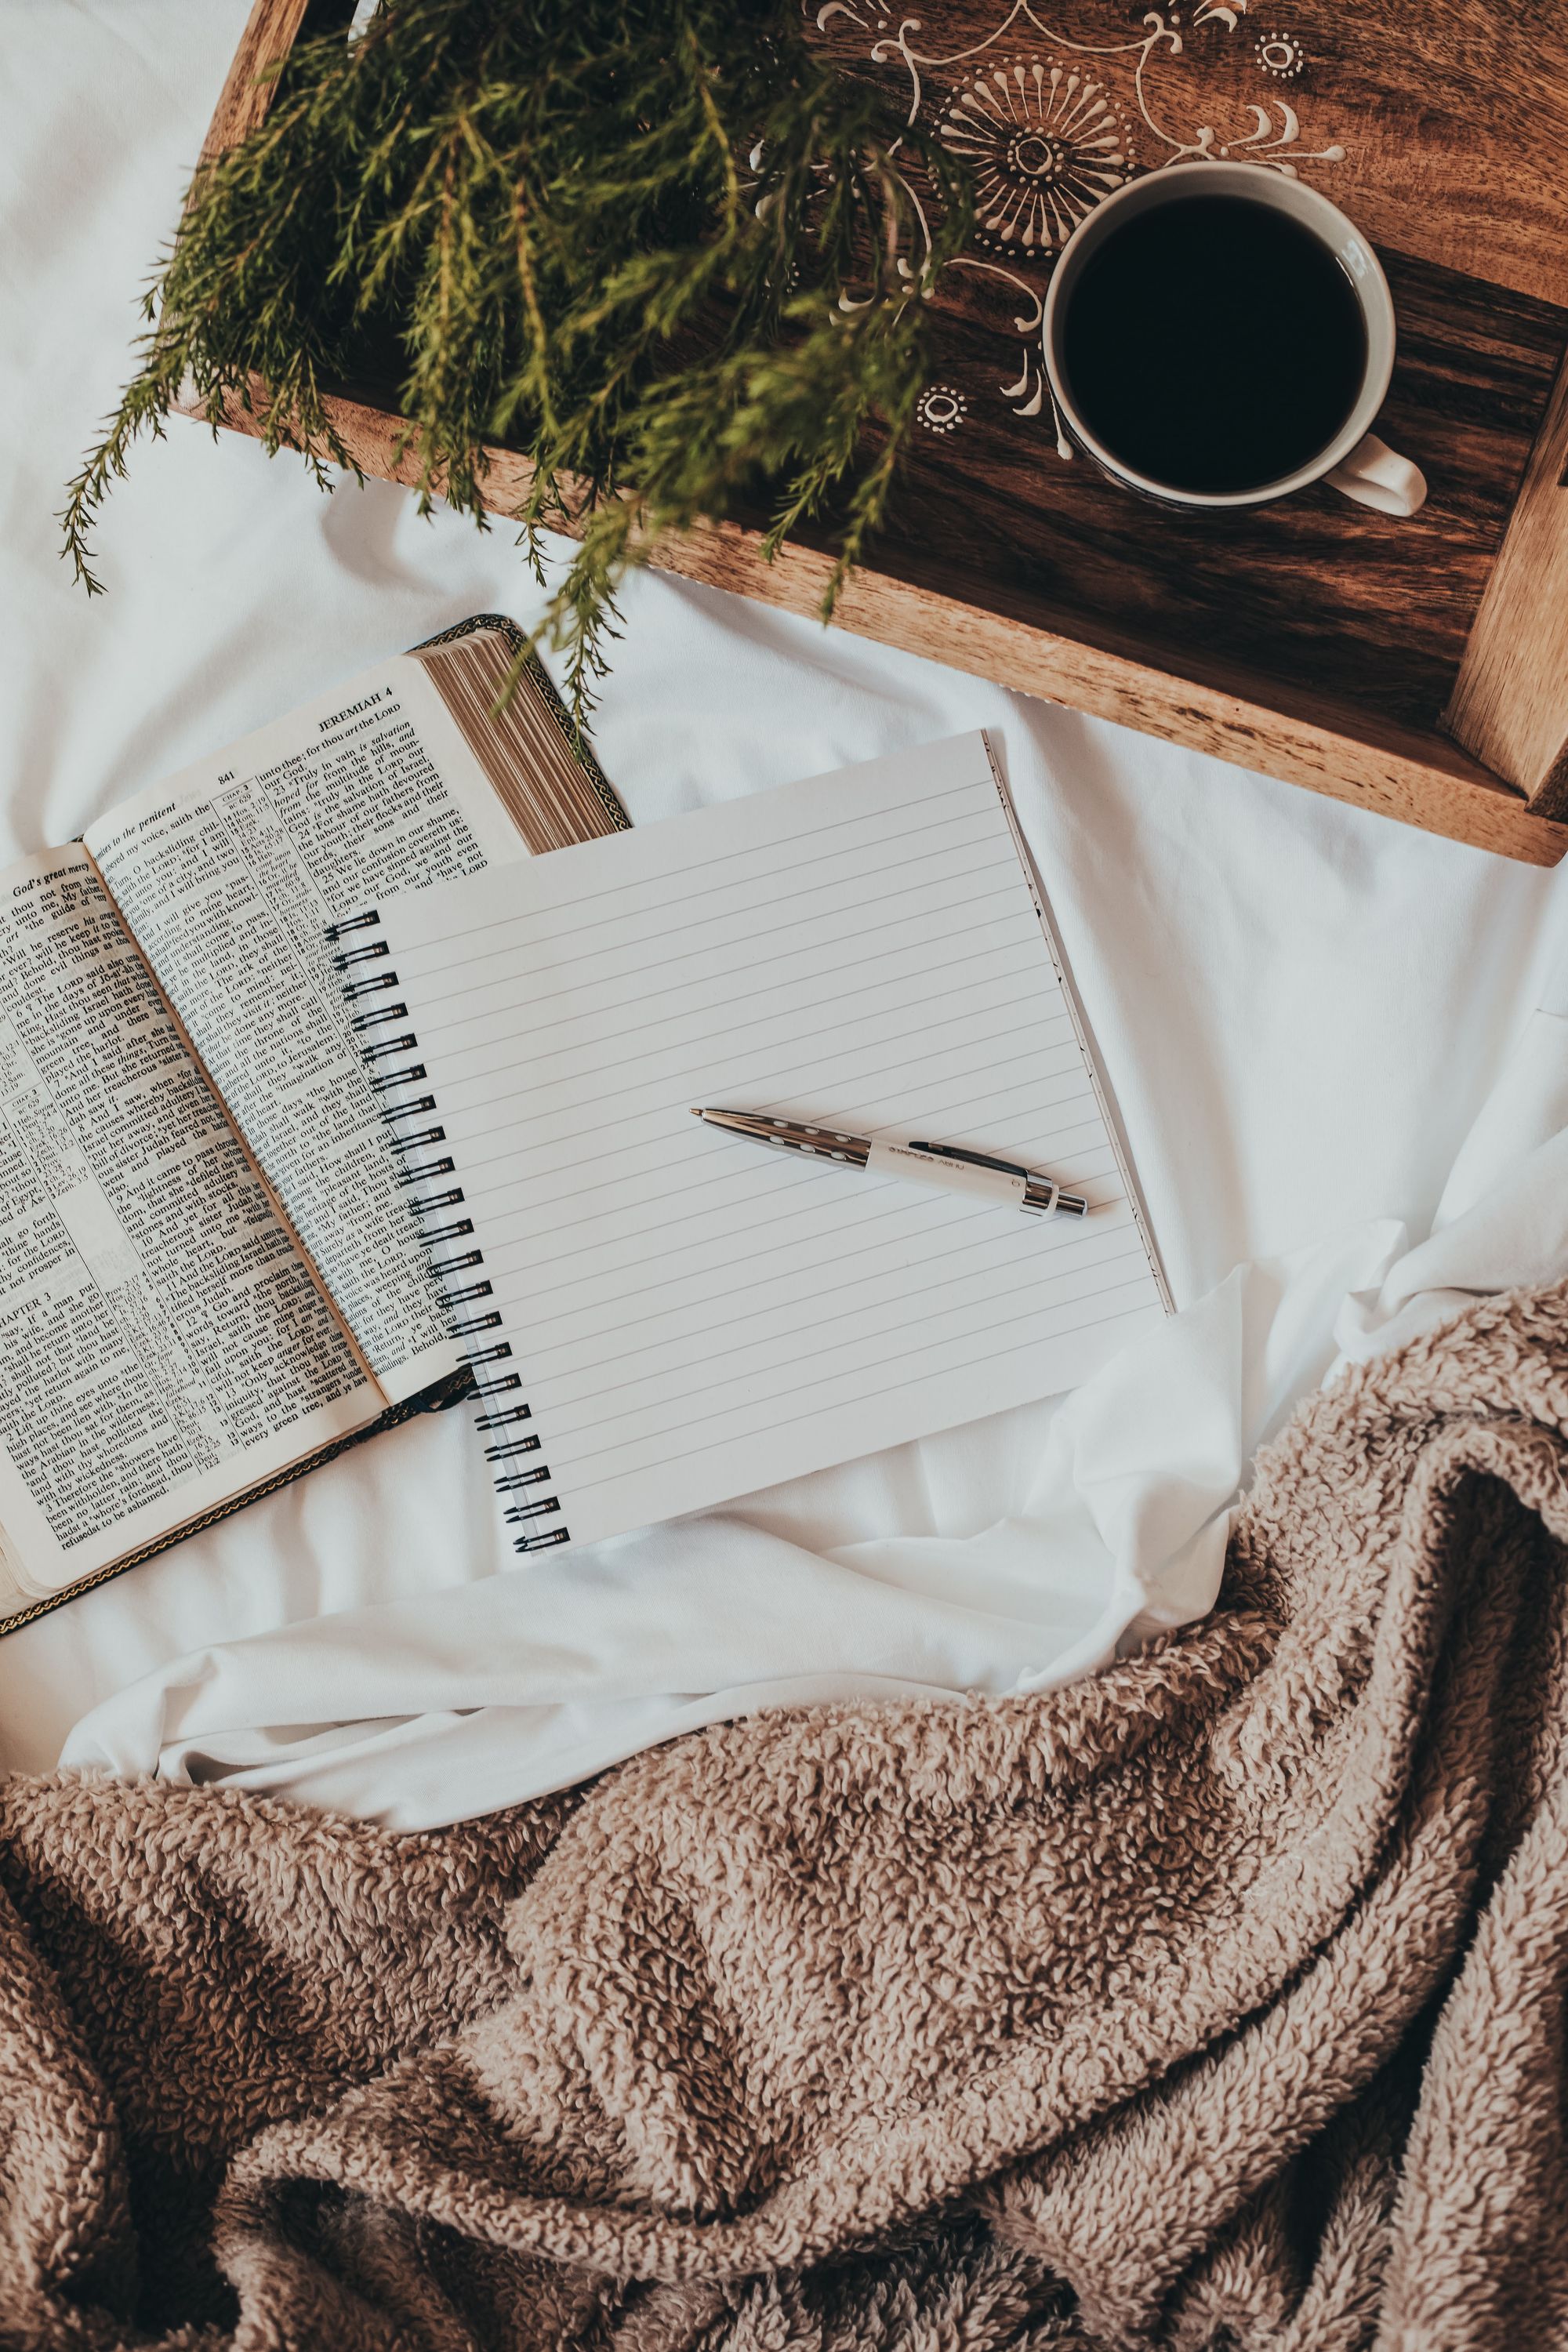 How to Write Morning Pages & Why It's Helpful